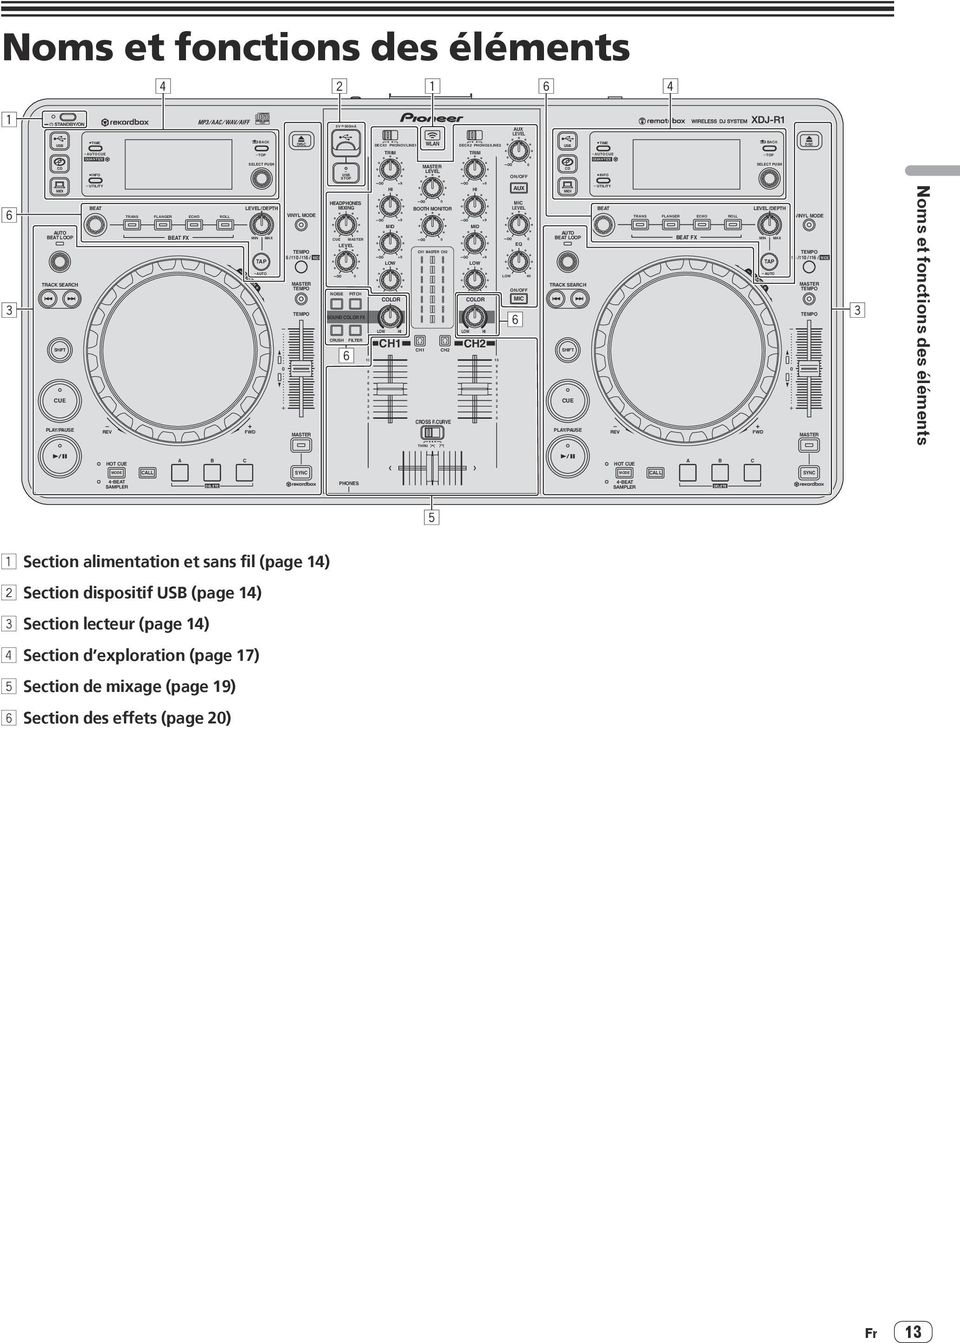 MASTER HEADPHONES MIXING CUE MASTER LEVEL CRUSH USB STOP 6 FILTER 1 9 8 7 6 5 4 3 2 1 DECK1 PHONO1/LINE1 LOW TRIM HI MID LOW HI CH1 WLAN BOOTH MONITOR CH1 CH1 MASTER LEVEL THRU MASTER CH2 CH2 CROSS F.